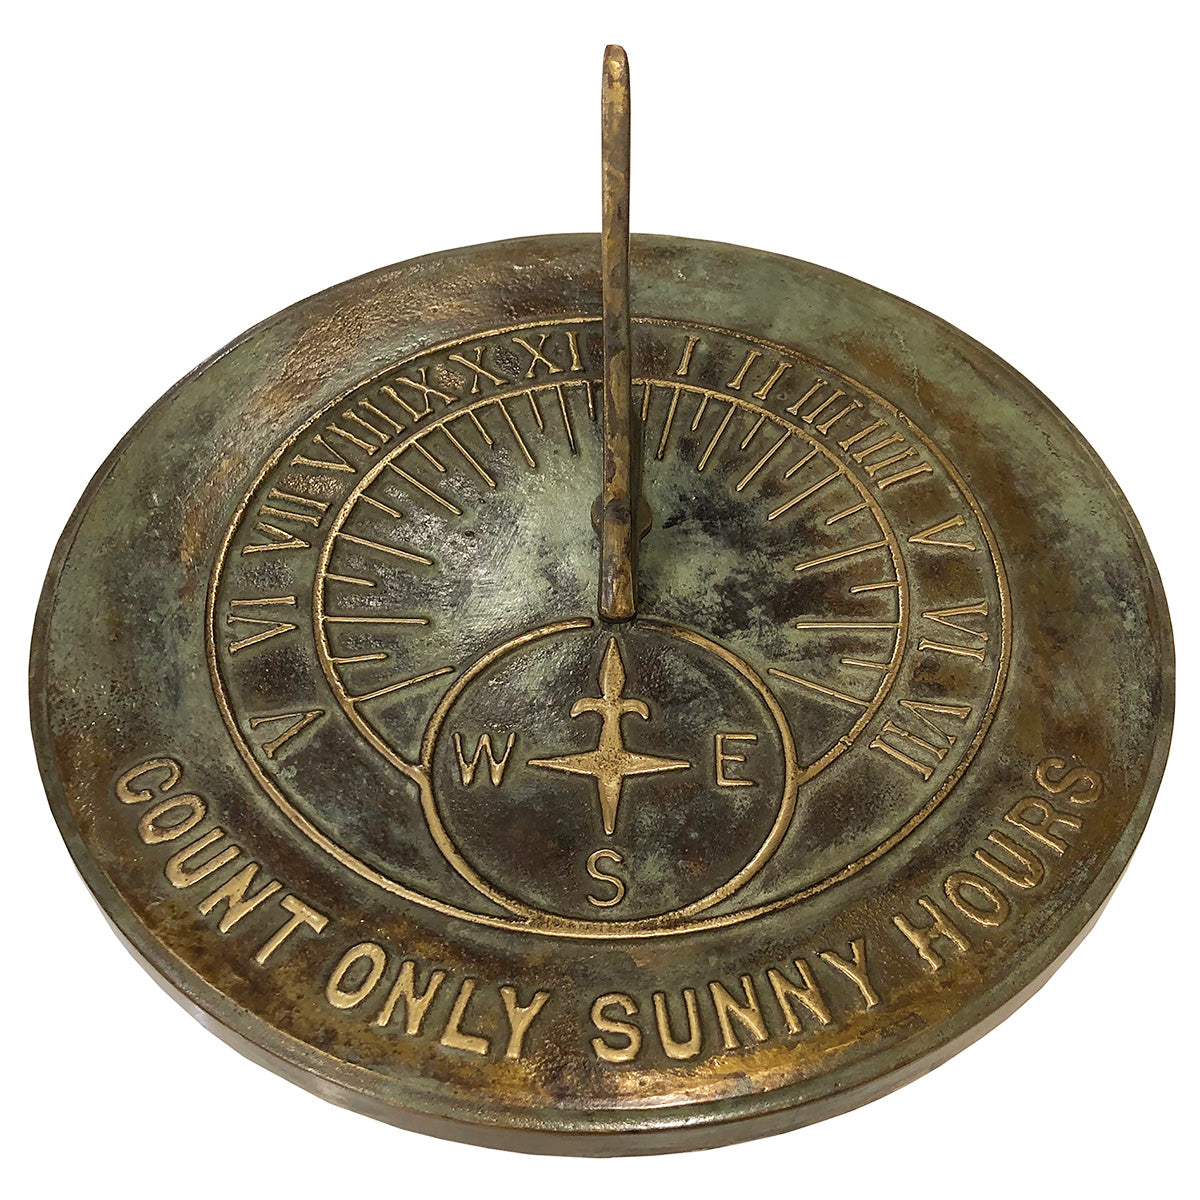 Solid Brass Count Sunny Hours Sundial, 10 3/8" dia. Rome #2120